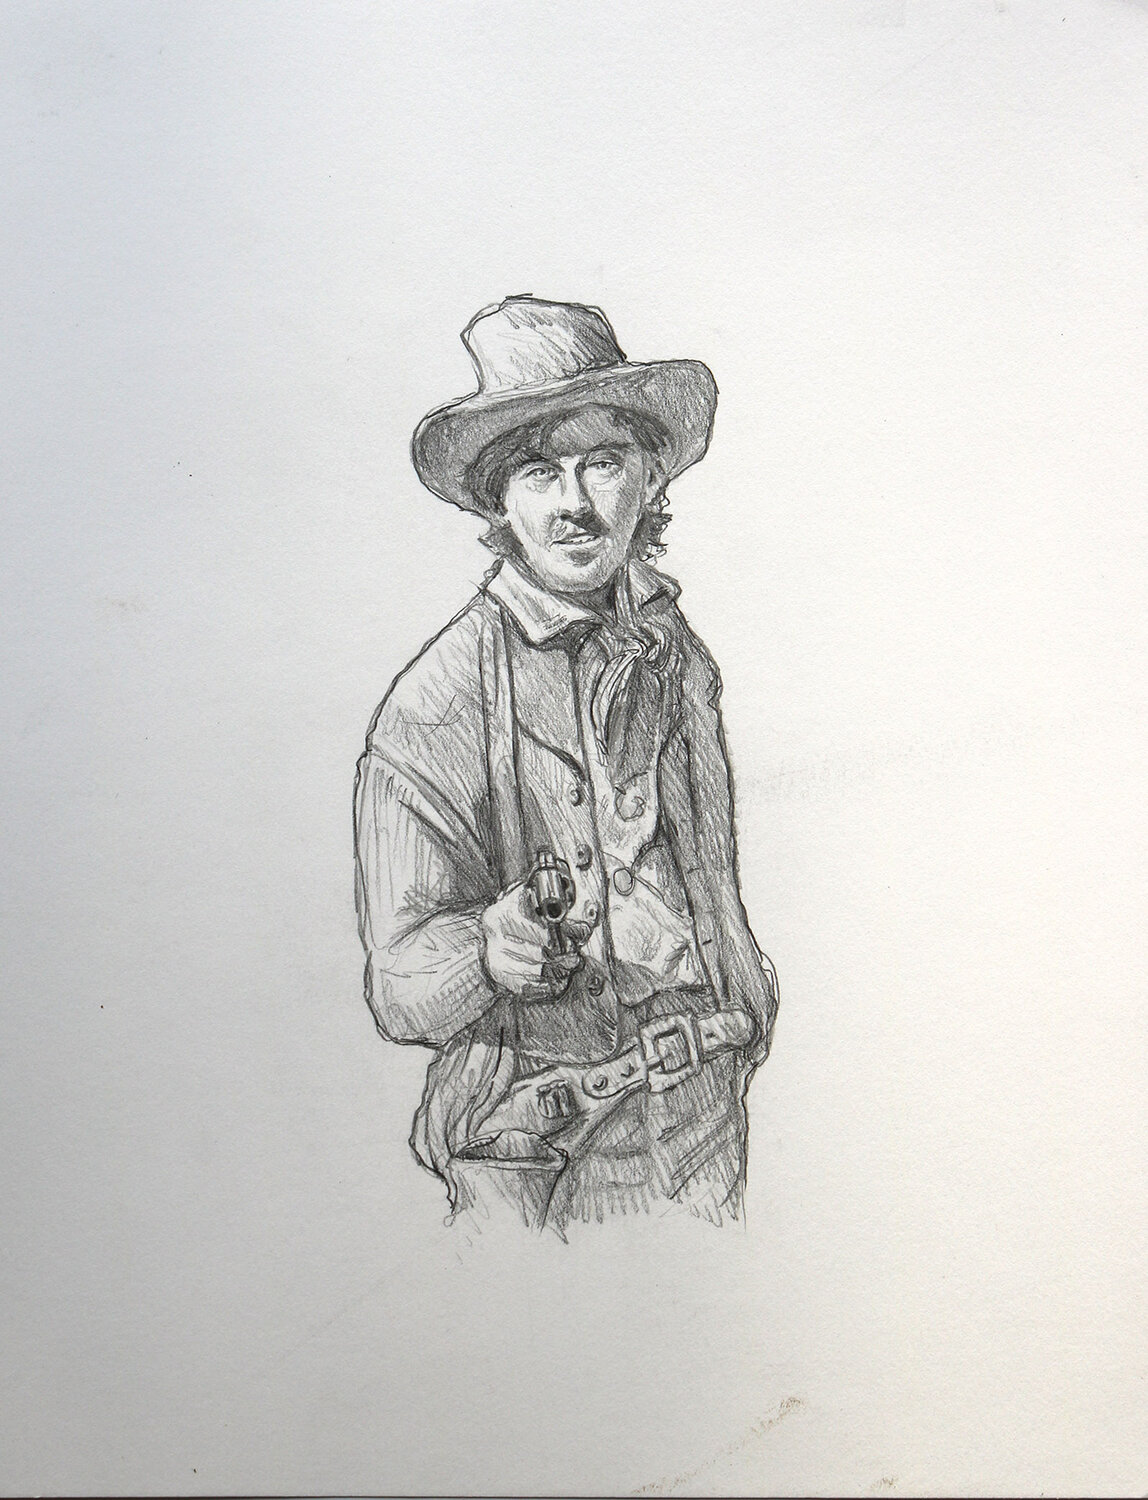 An original pencil illustration for an article on Billy the Kid.  2019.  Pencil on Bristol paper.  9 x 12 inches, 3.25 x 7.5 inches image size.